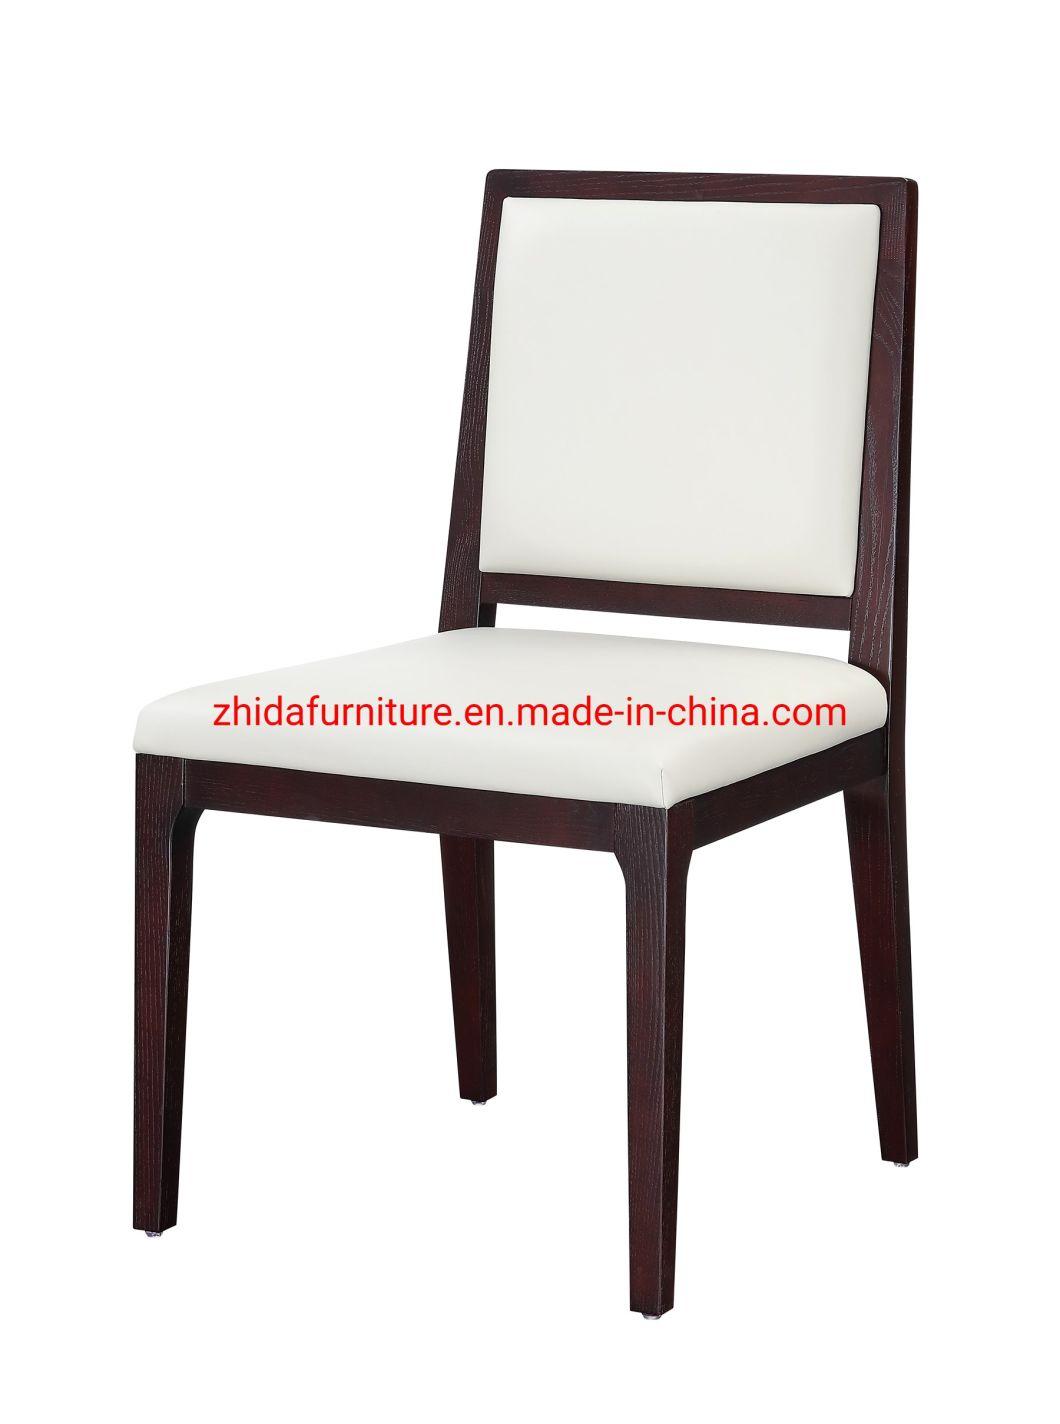 Modern Simple Design Fabric Commercial Dining Chair Restaurant Chair